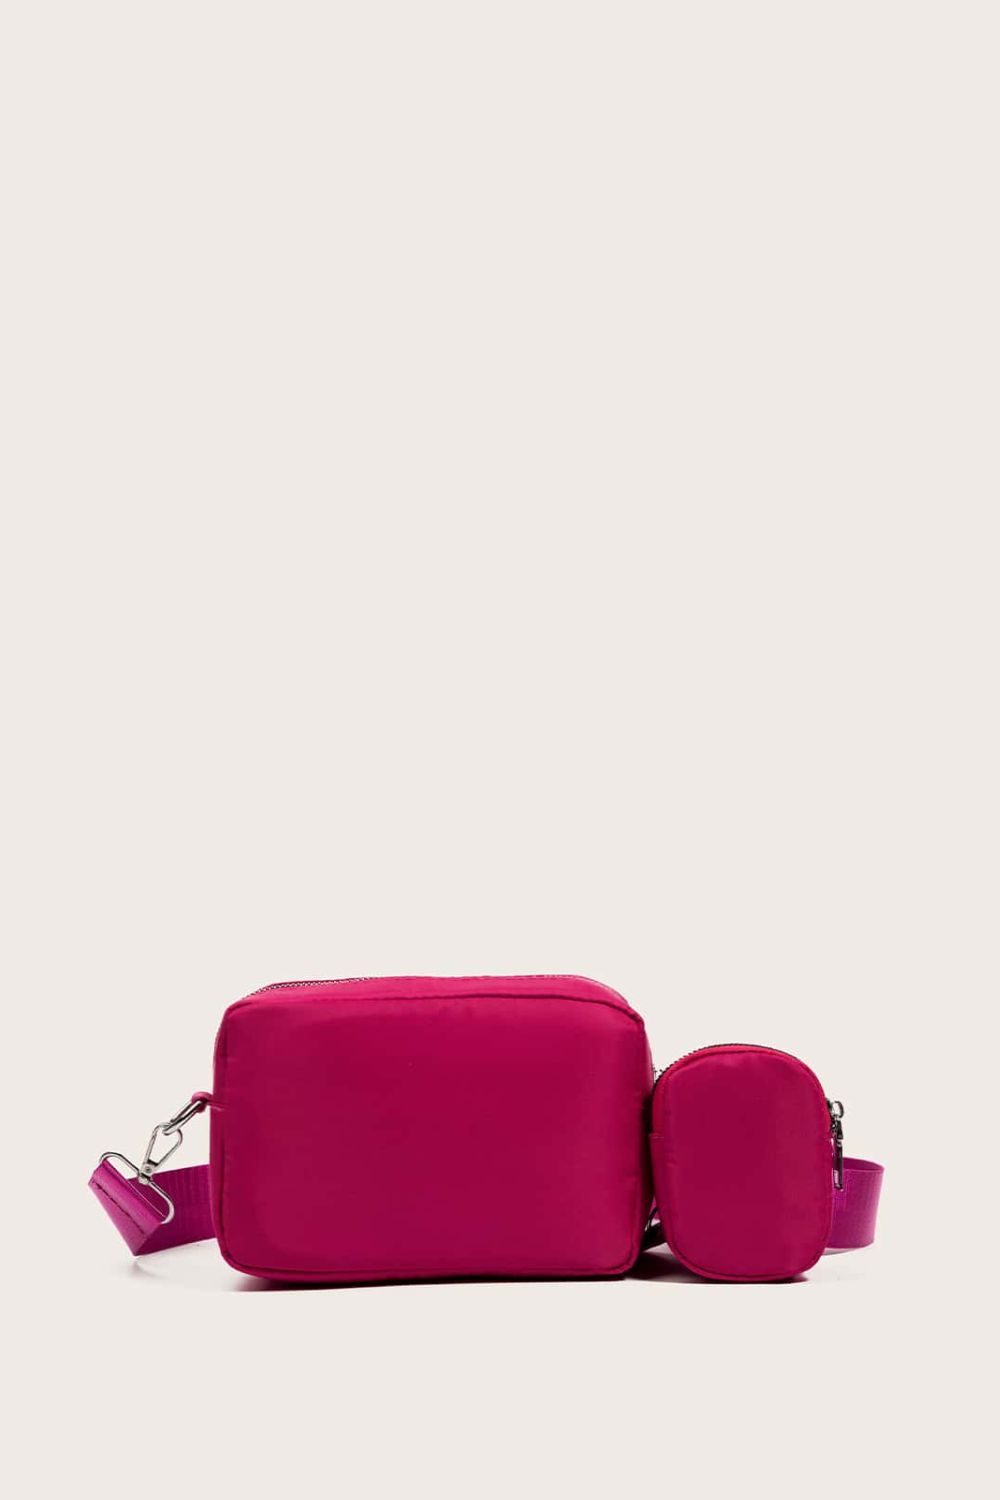 Pink Shoulder Bag with Small Purse